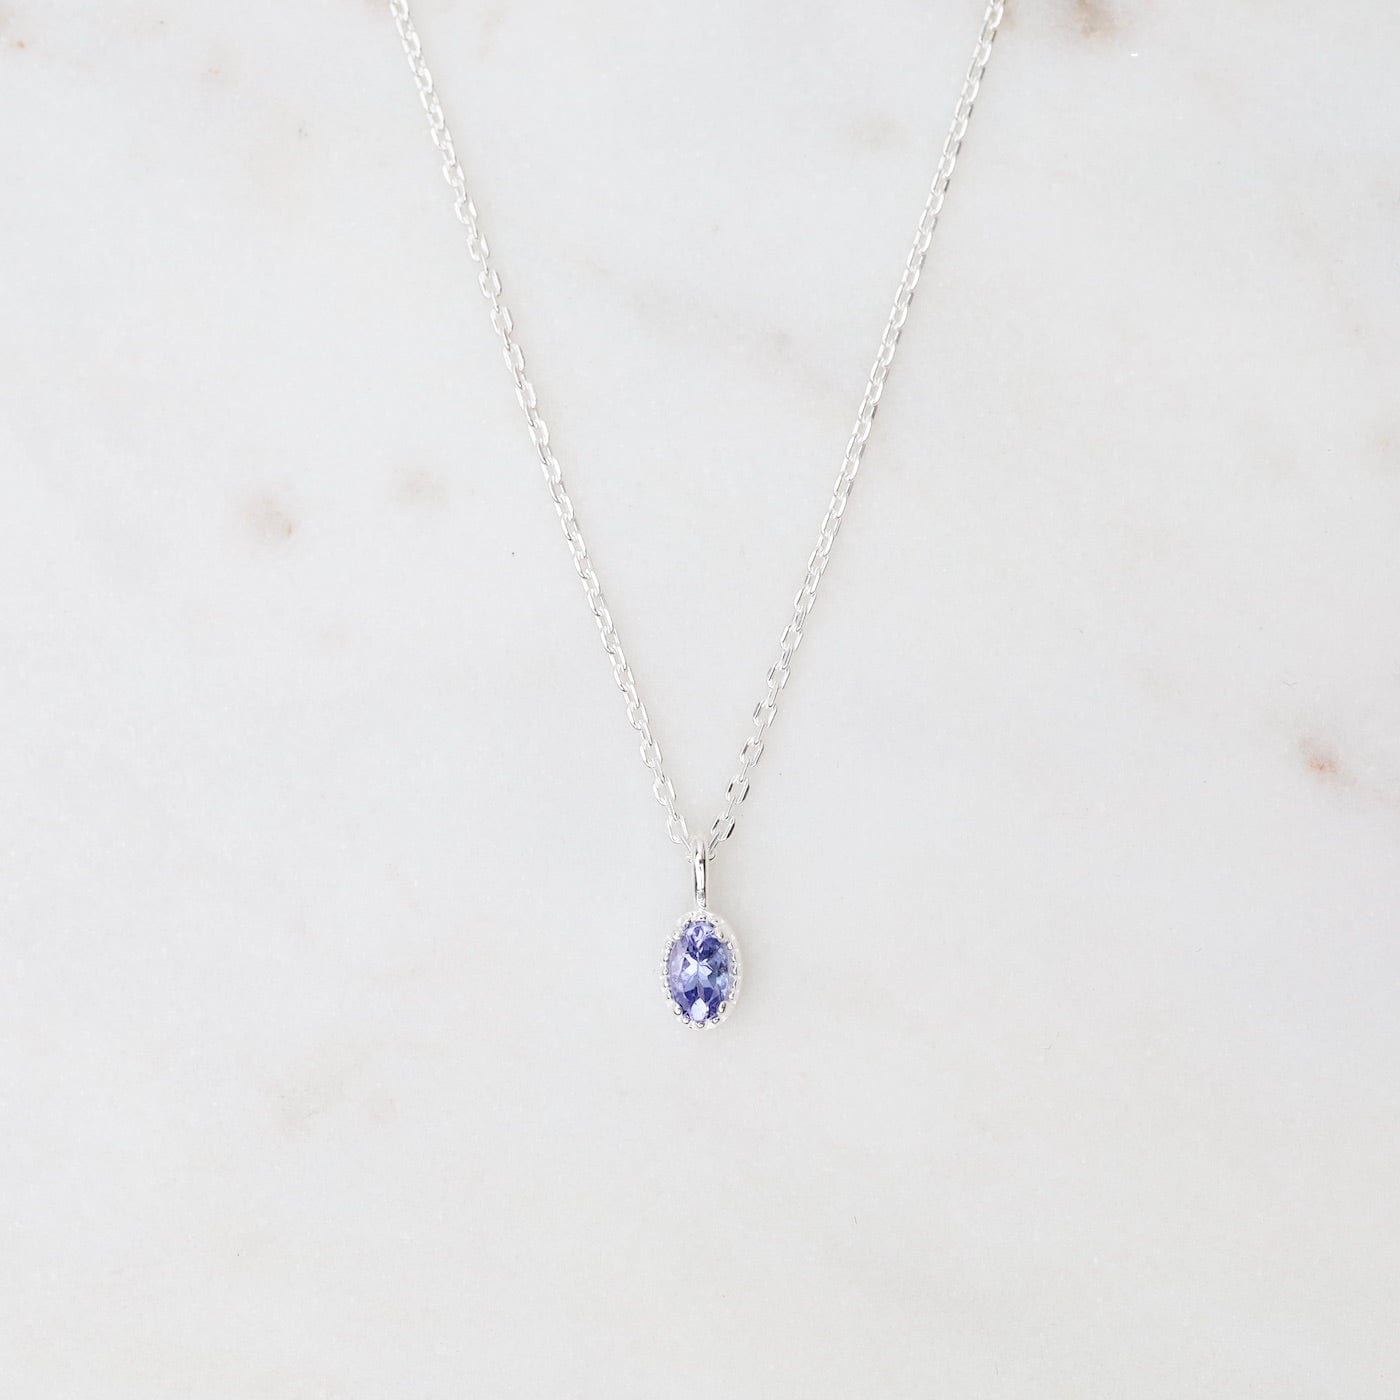 NKL Oval Tanzanite with Milgrain Edge Necklace - Sterling Silver